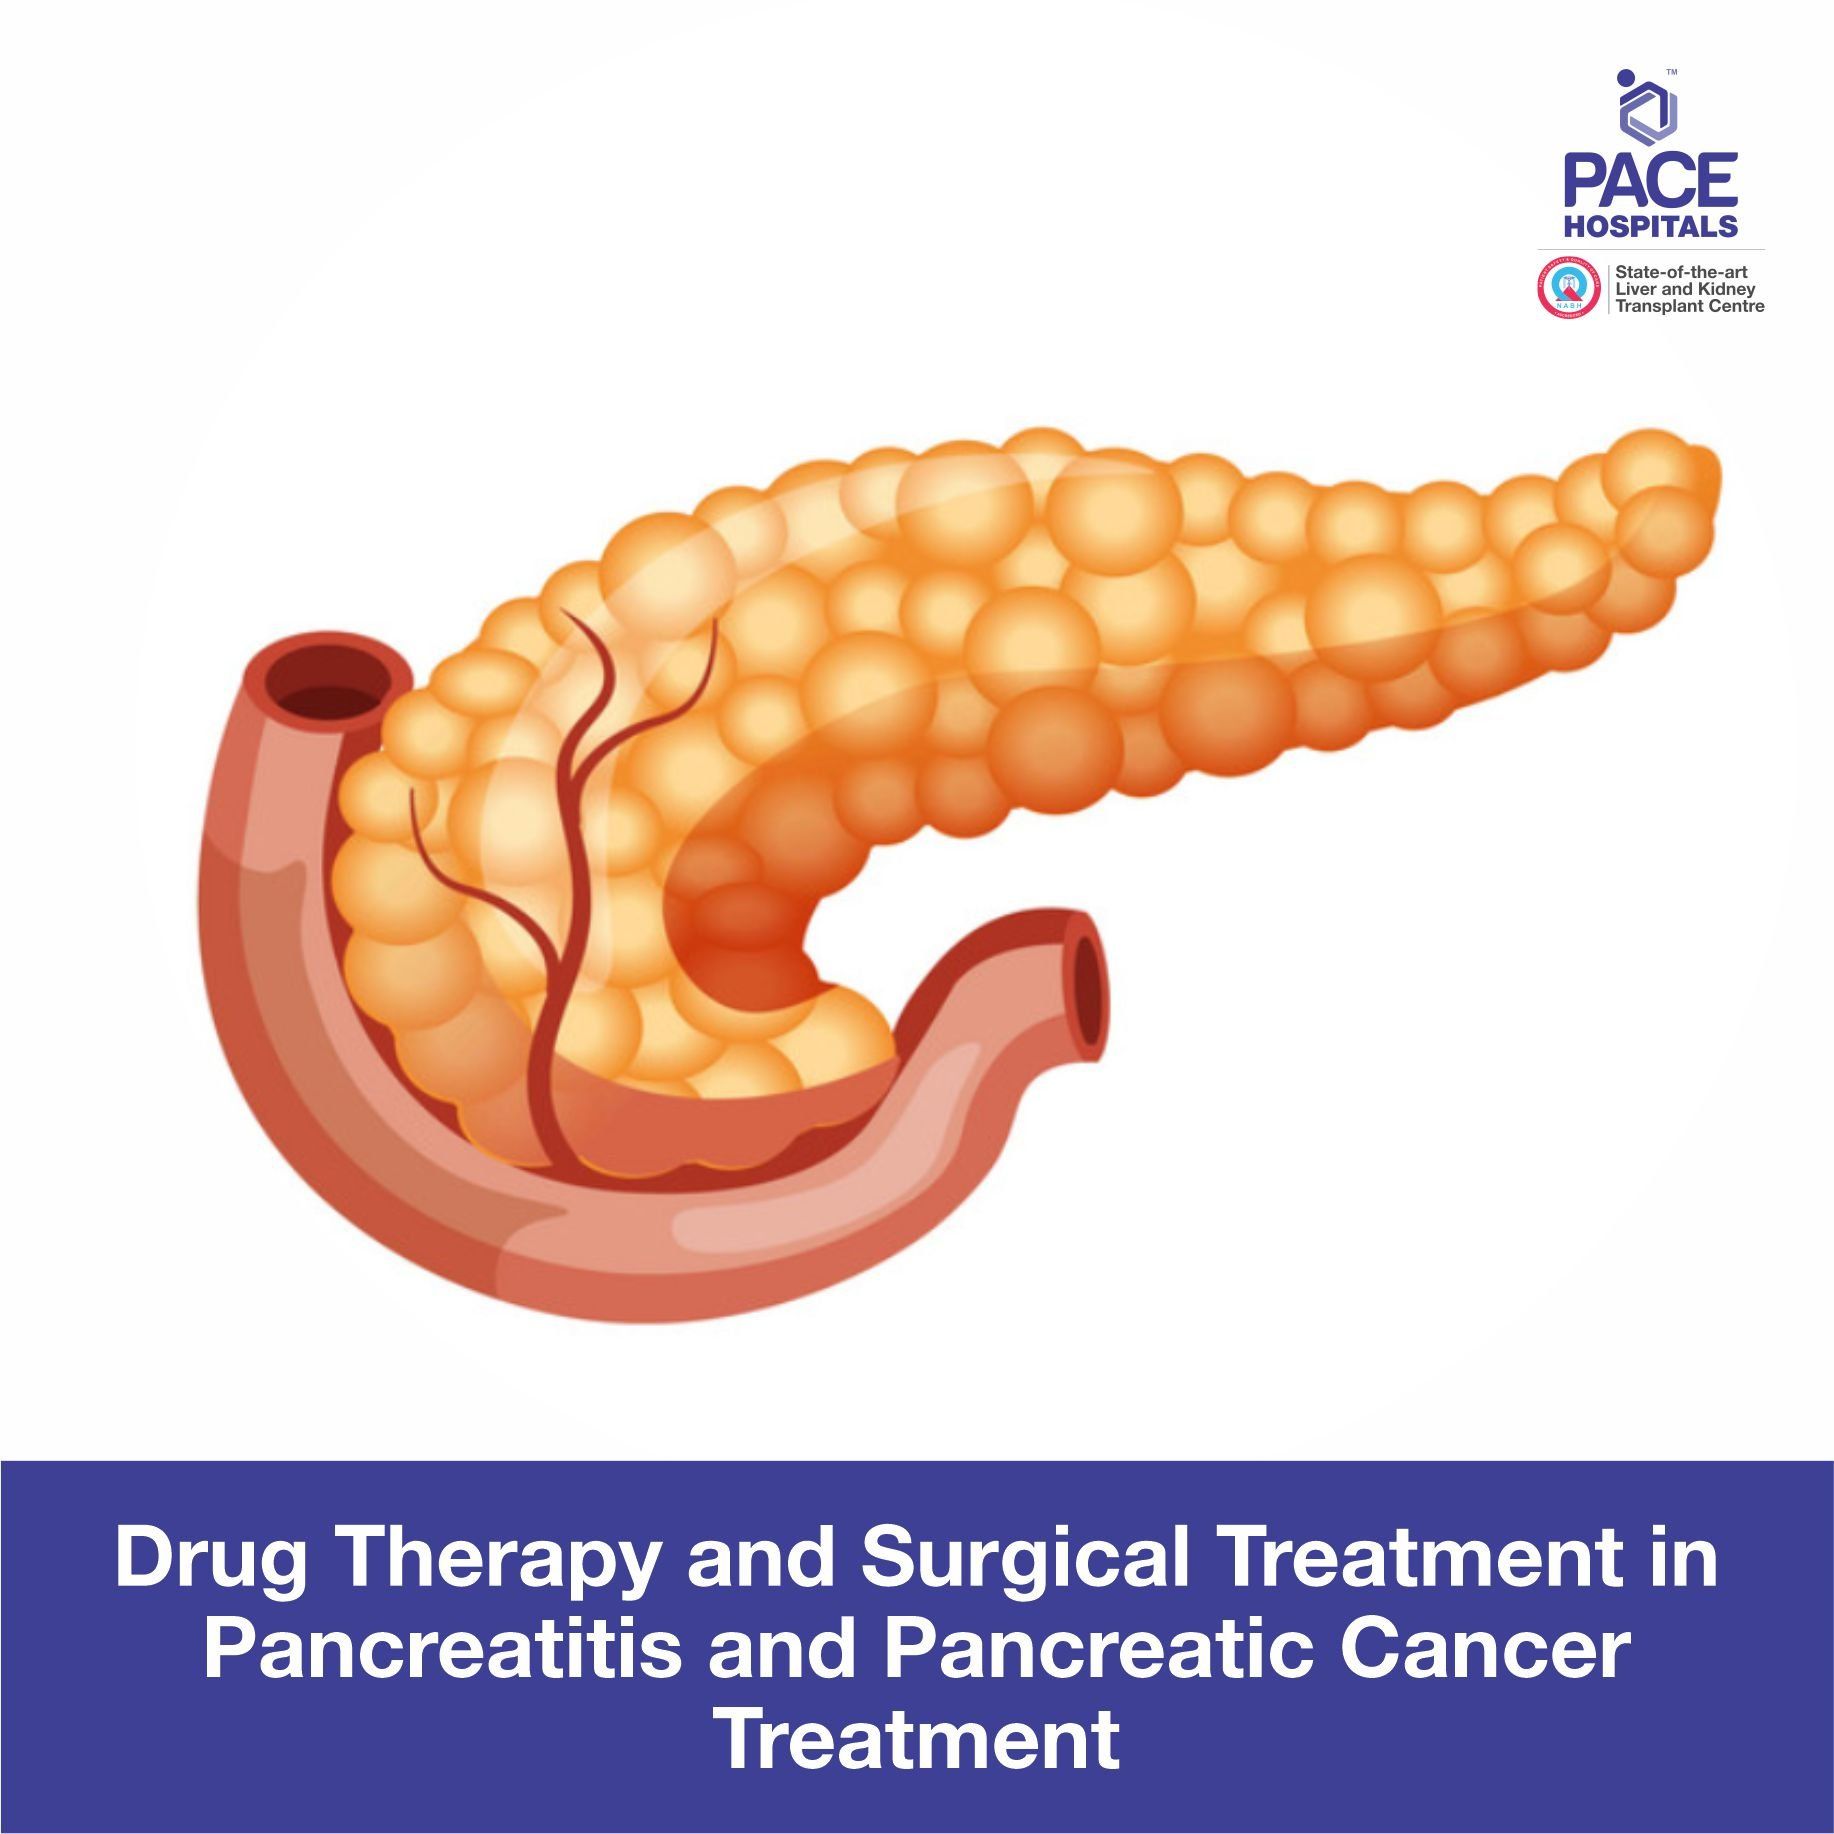 Drug Therapy and Surgical Treatment in Pancreatitis and Pancreatic Cancer Treatment